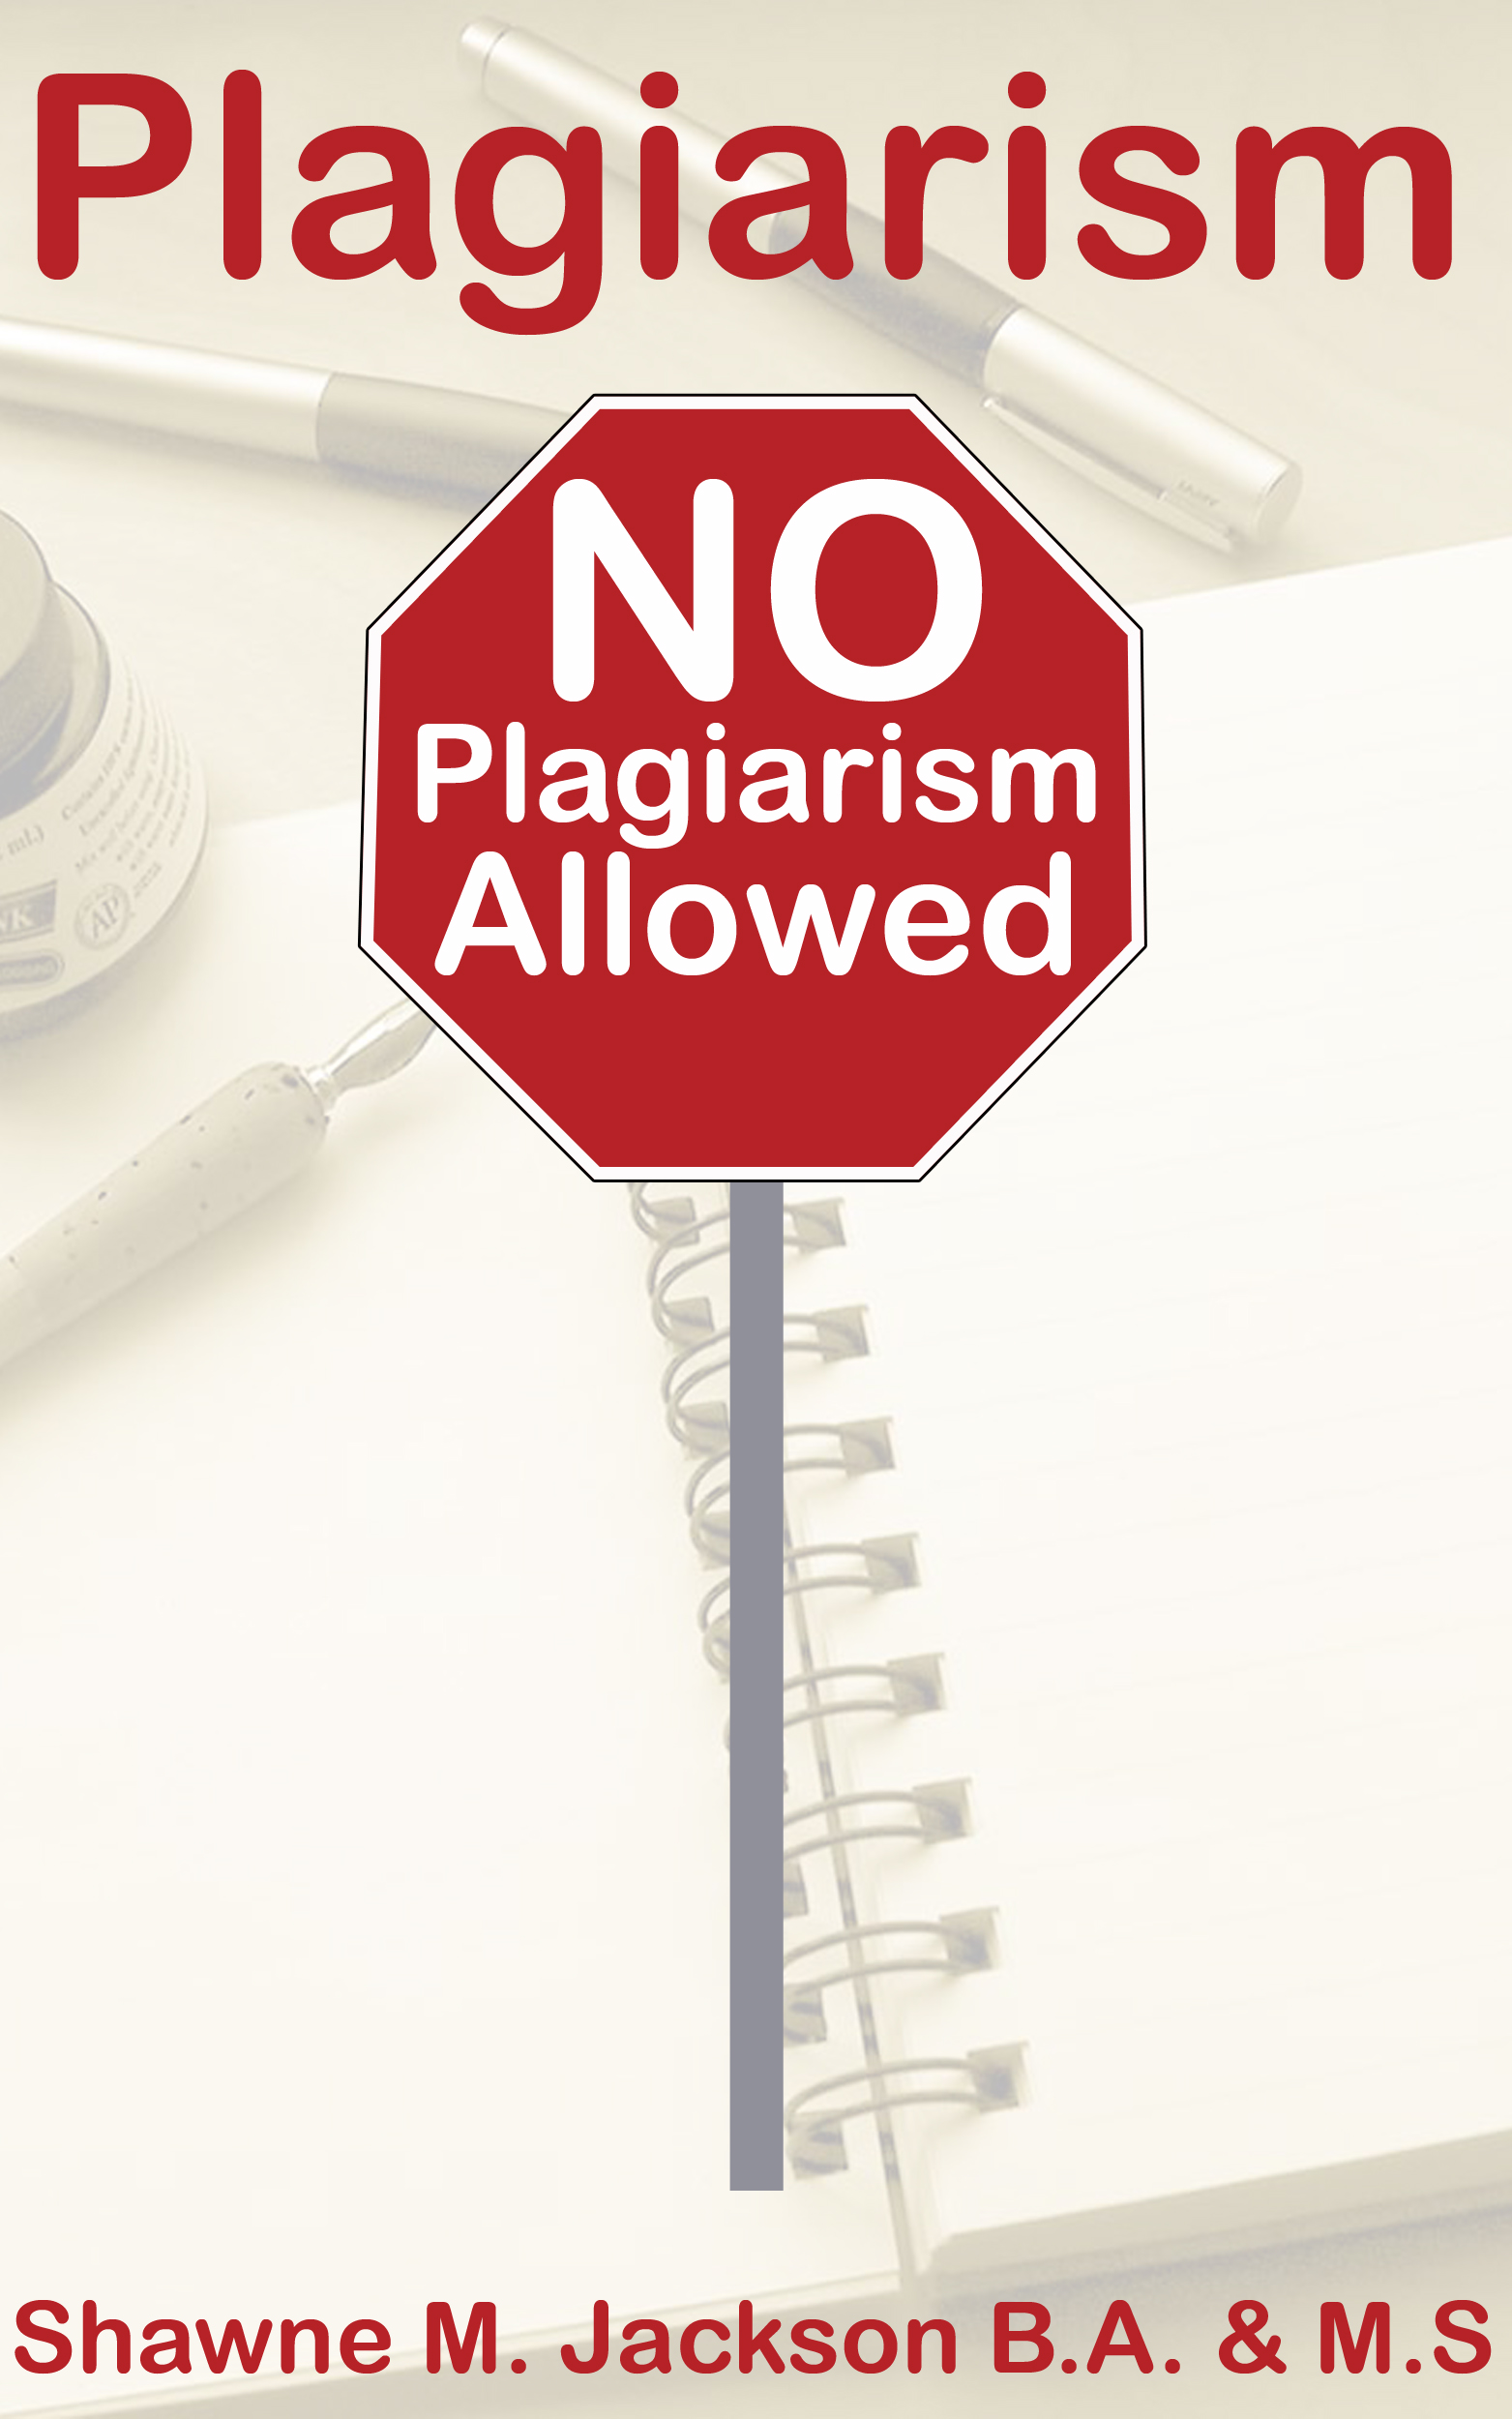 blogger.com - Get an A+|The Home of Custom Non-Plagiarized Papers